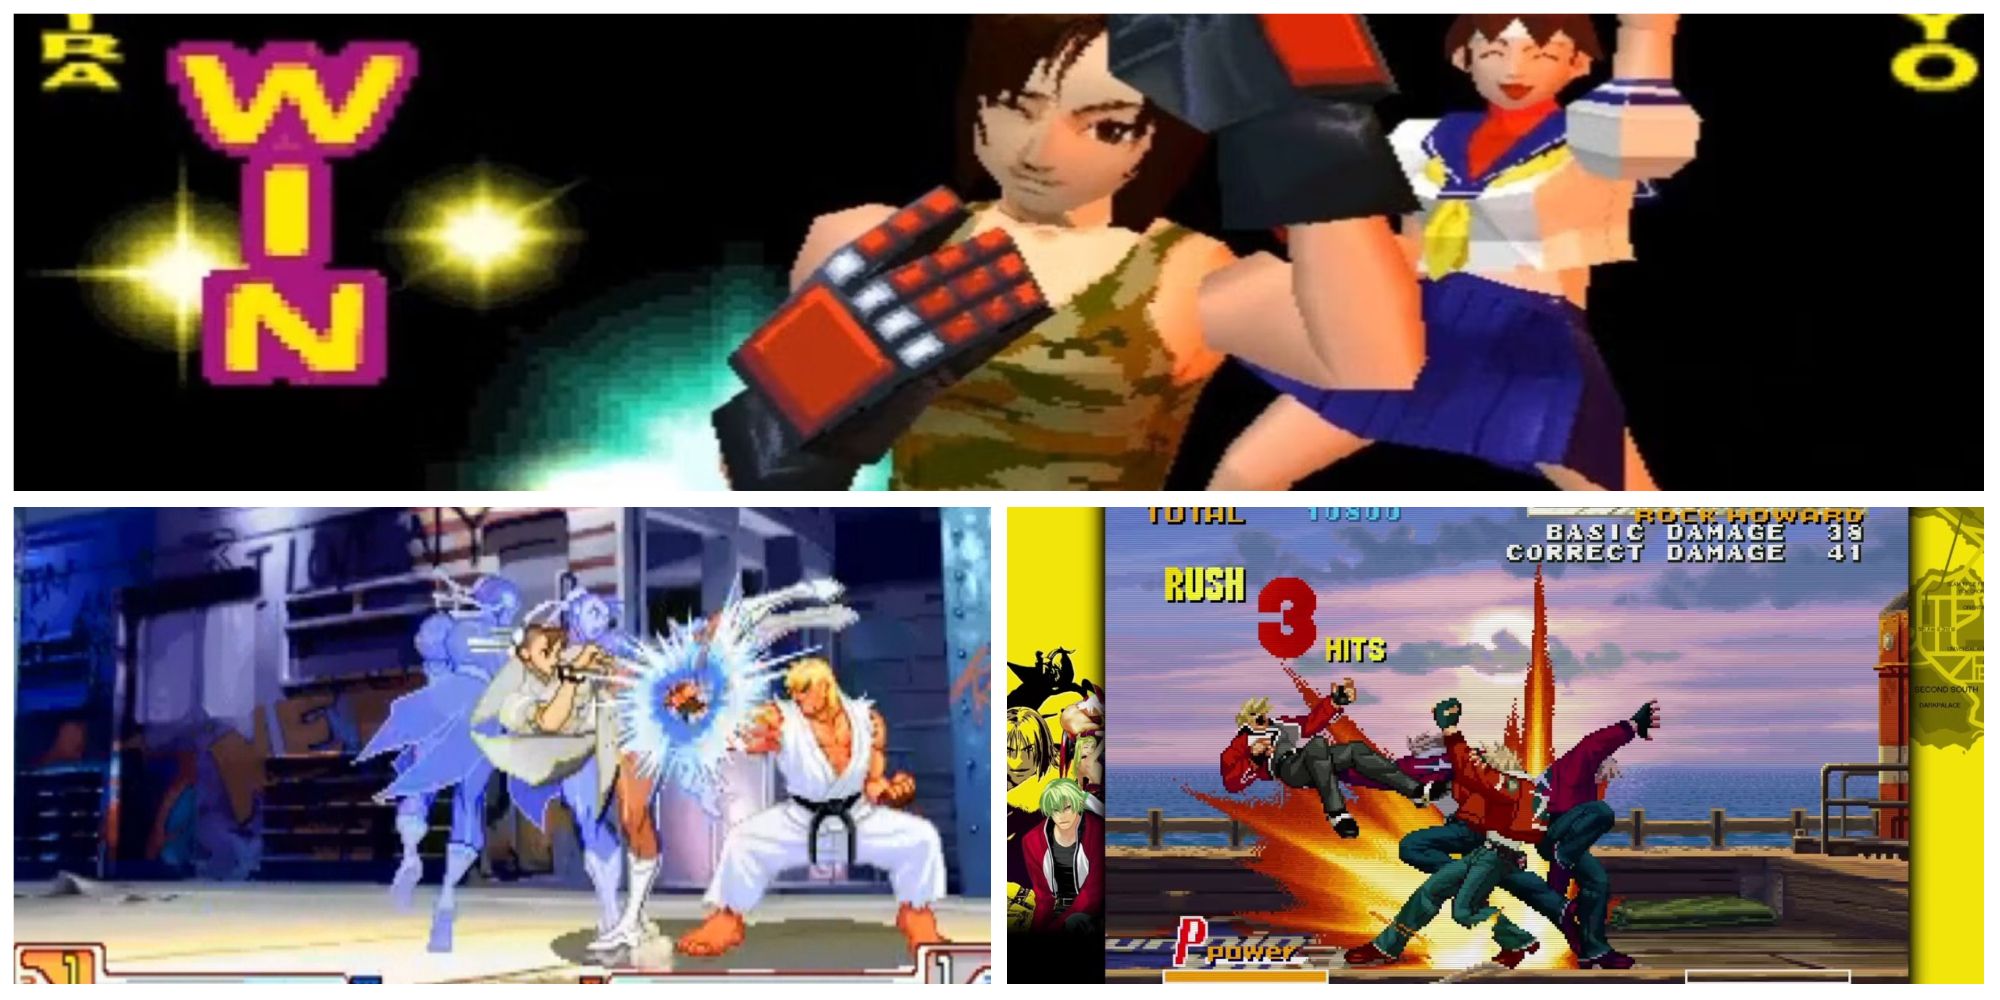 Cult Fighting Games- Rival Schools Street Fighter 3 Garou Mark of the Wolves